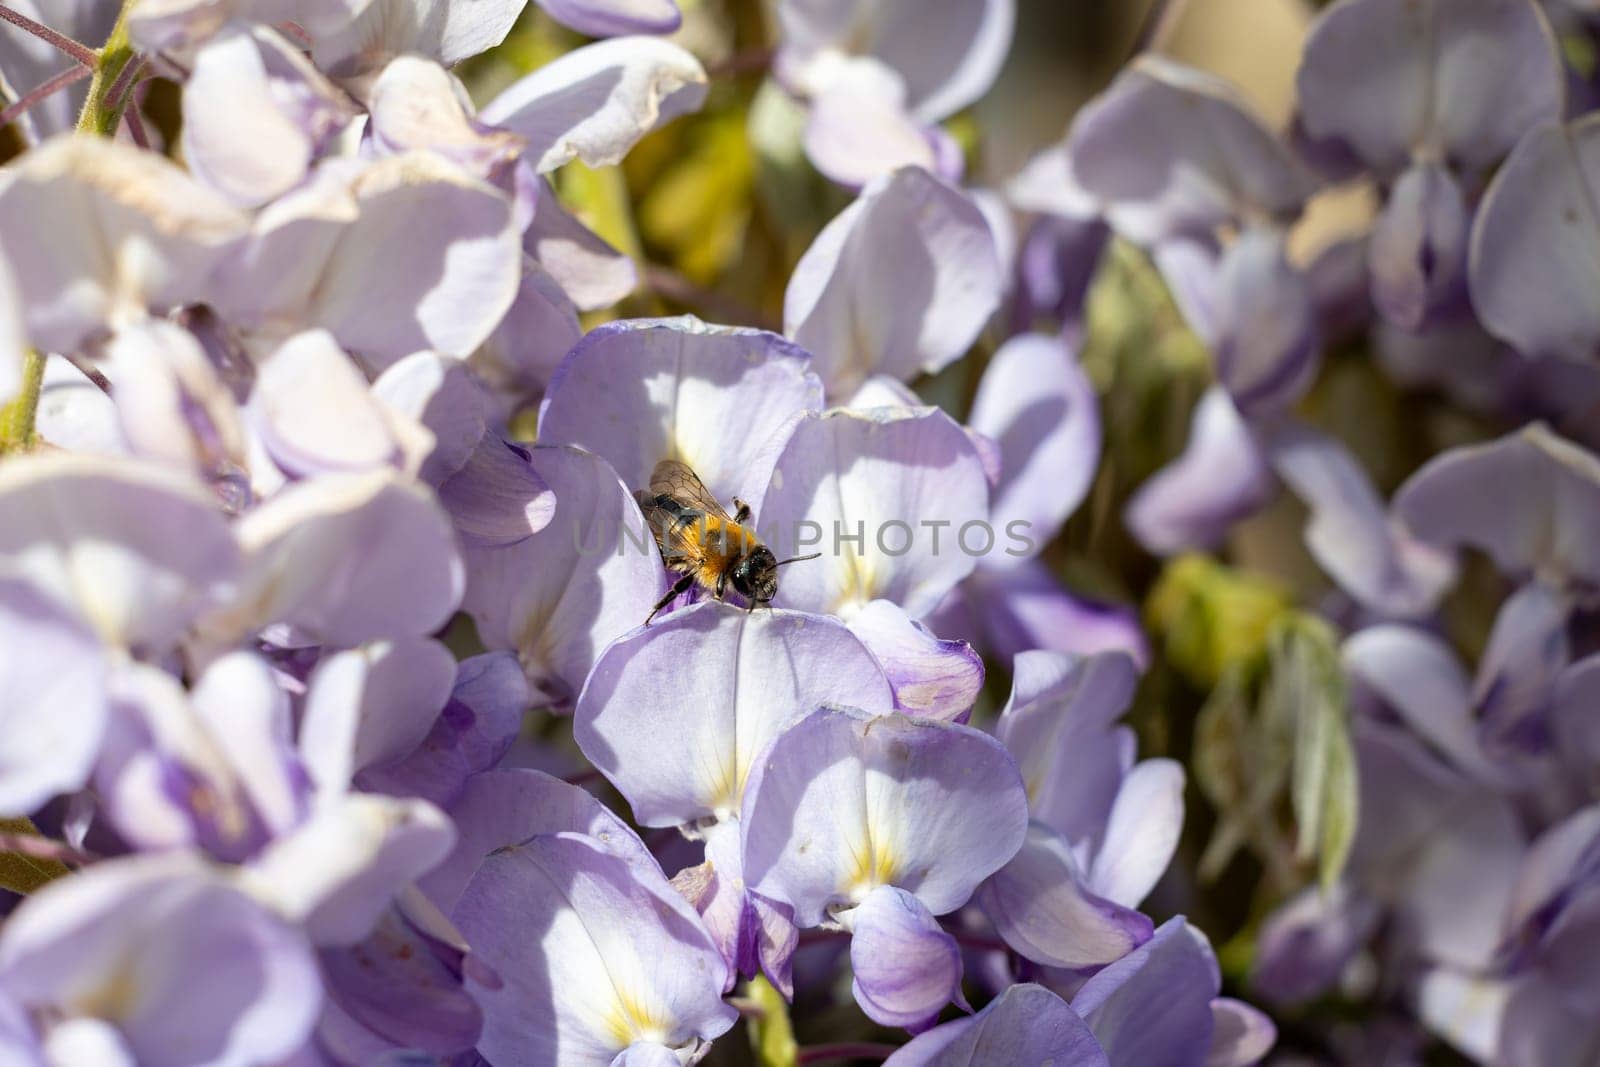 A bee is sitting on a purple flower. The flower is surrounded by other purple flowers. The bee is the main focus of the image